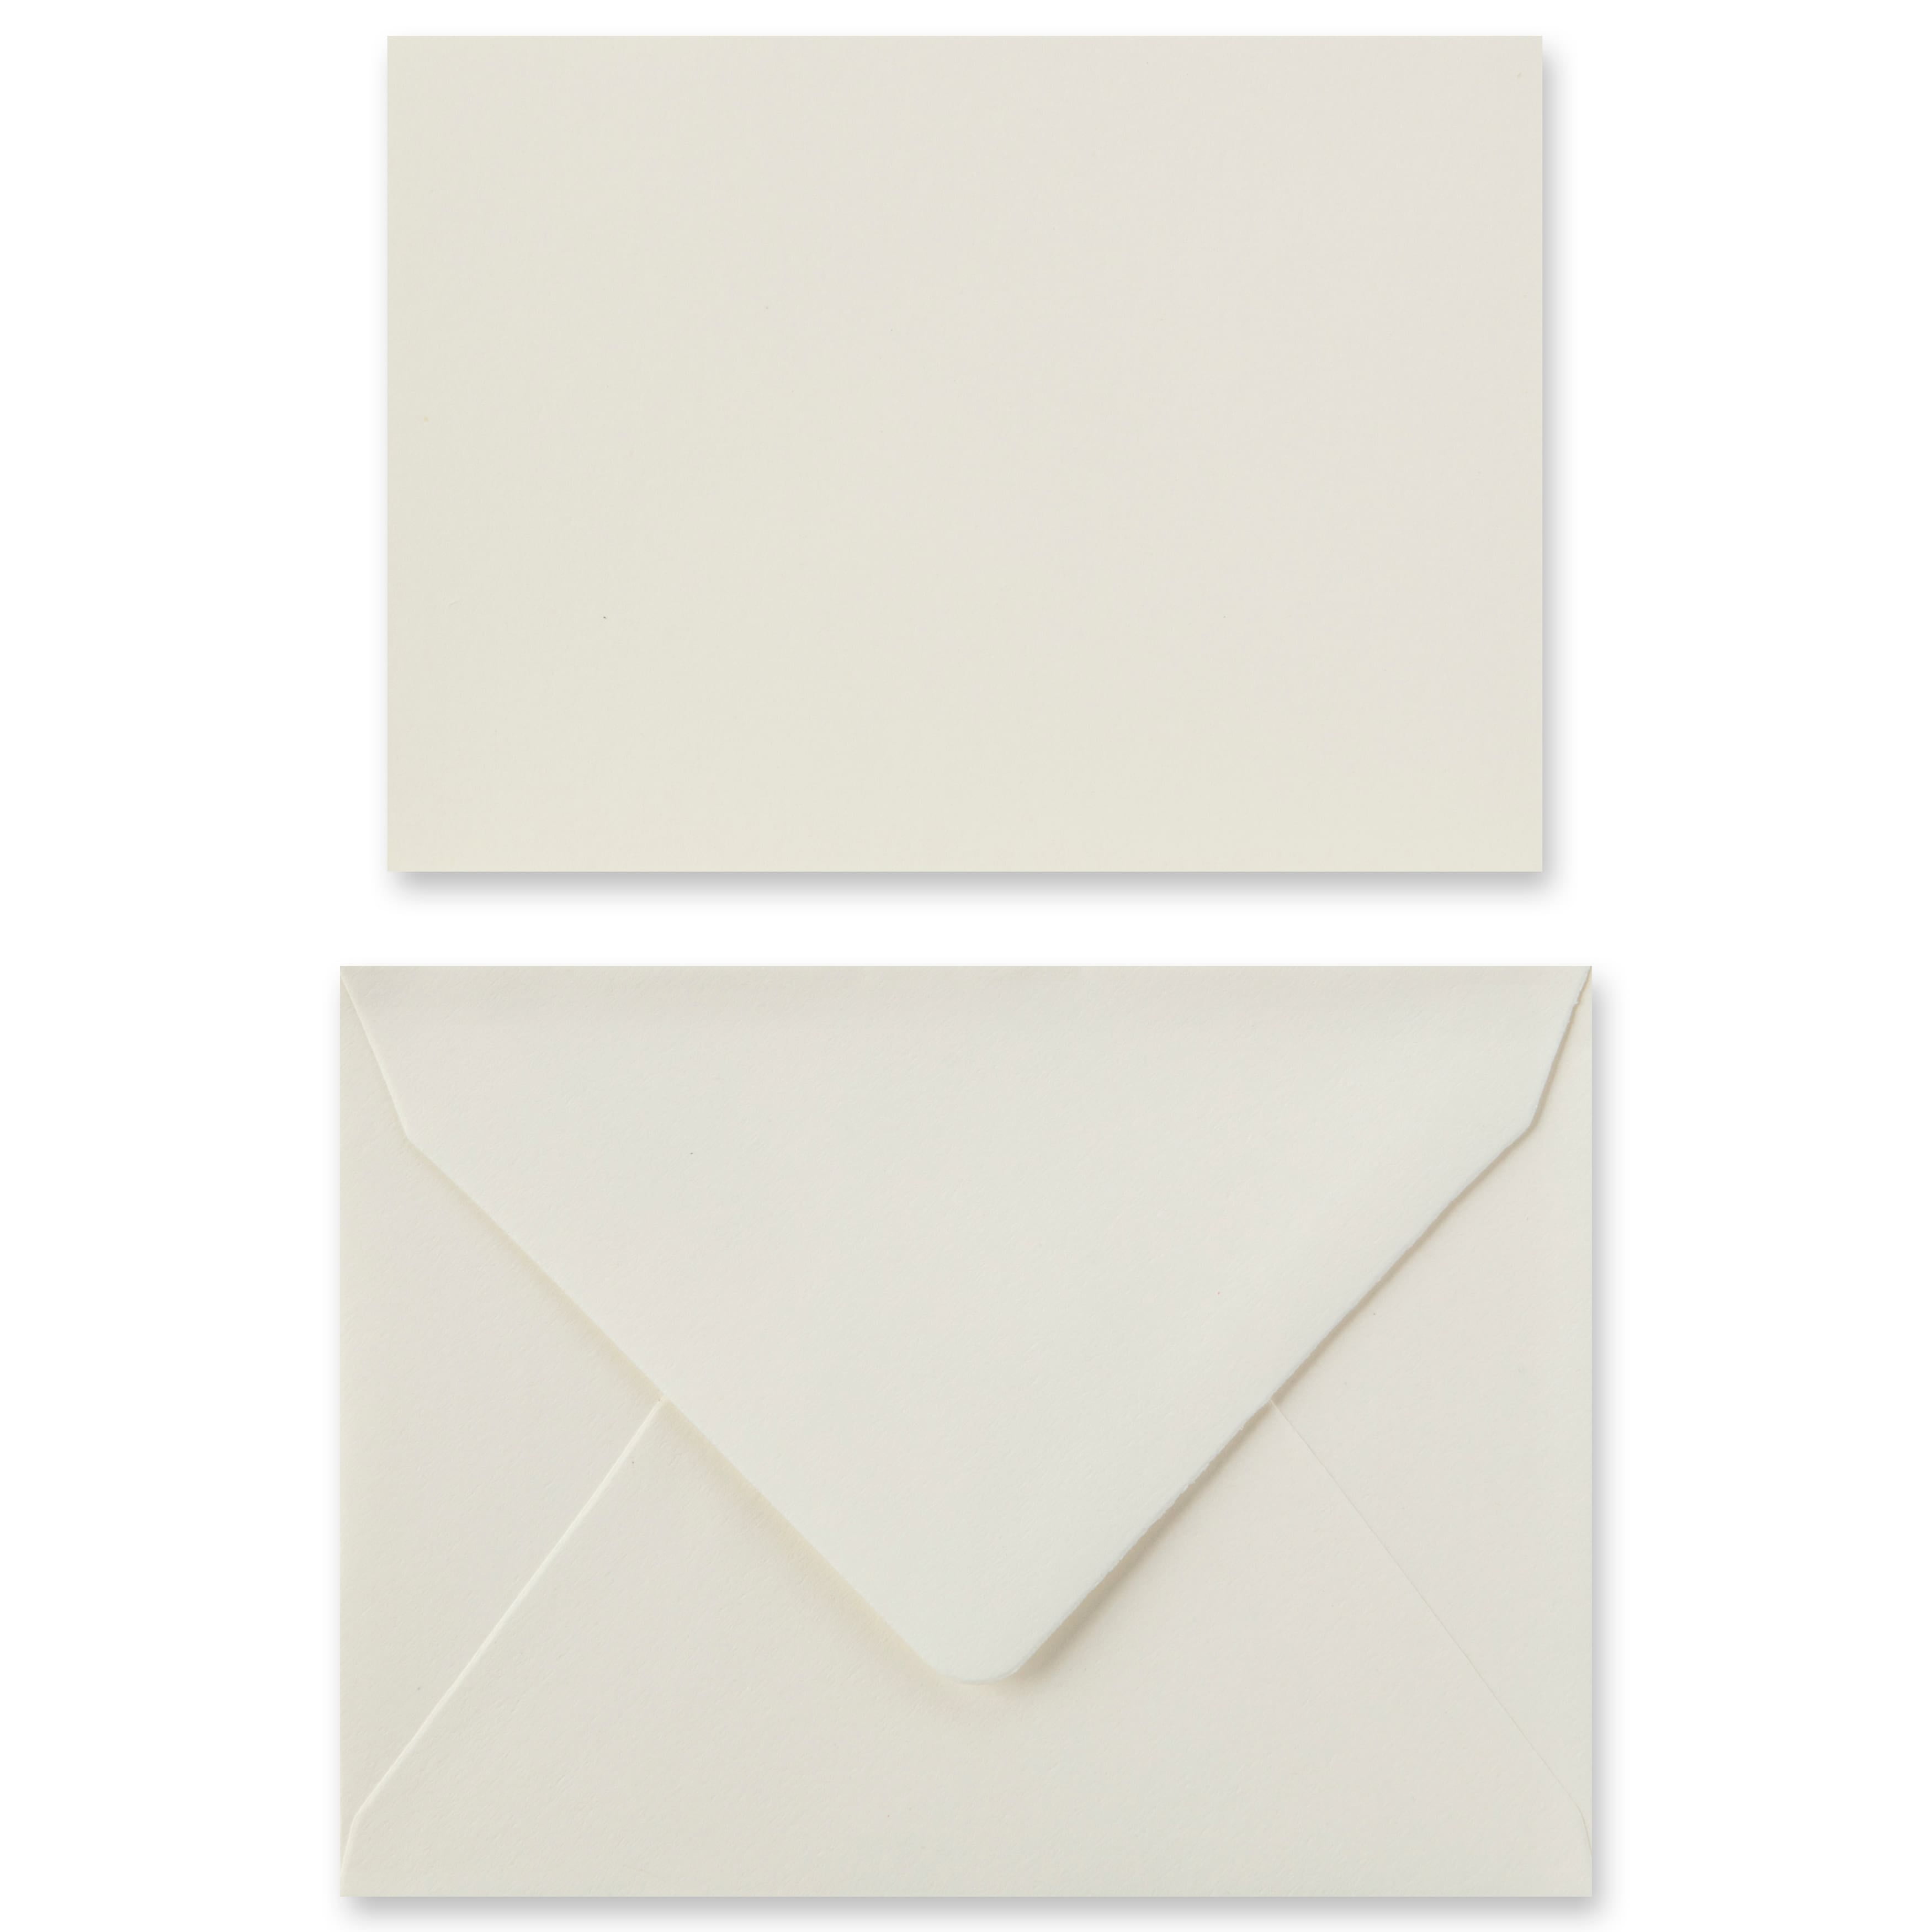 12 Packs: 20 ct. (240 total) White Cards & Envelopes by Recollections™,  2.5 x 3.5